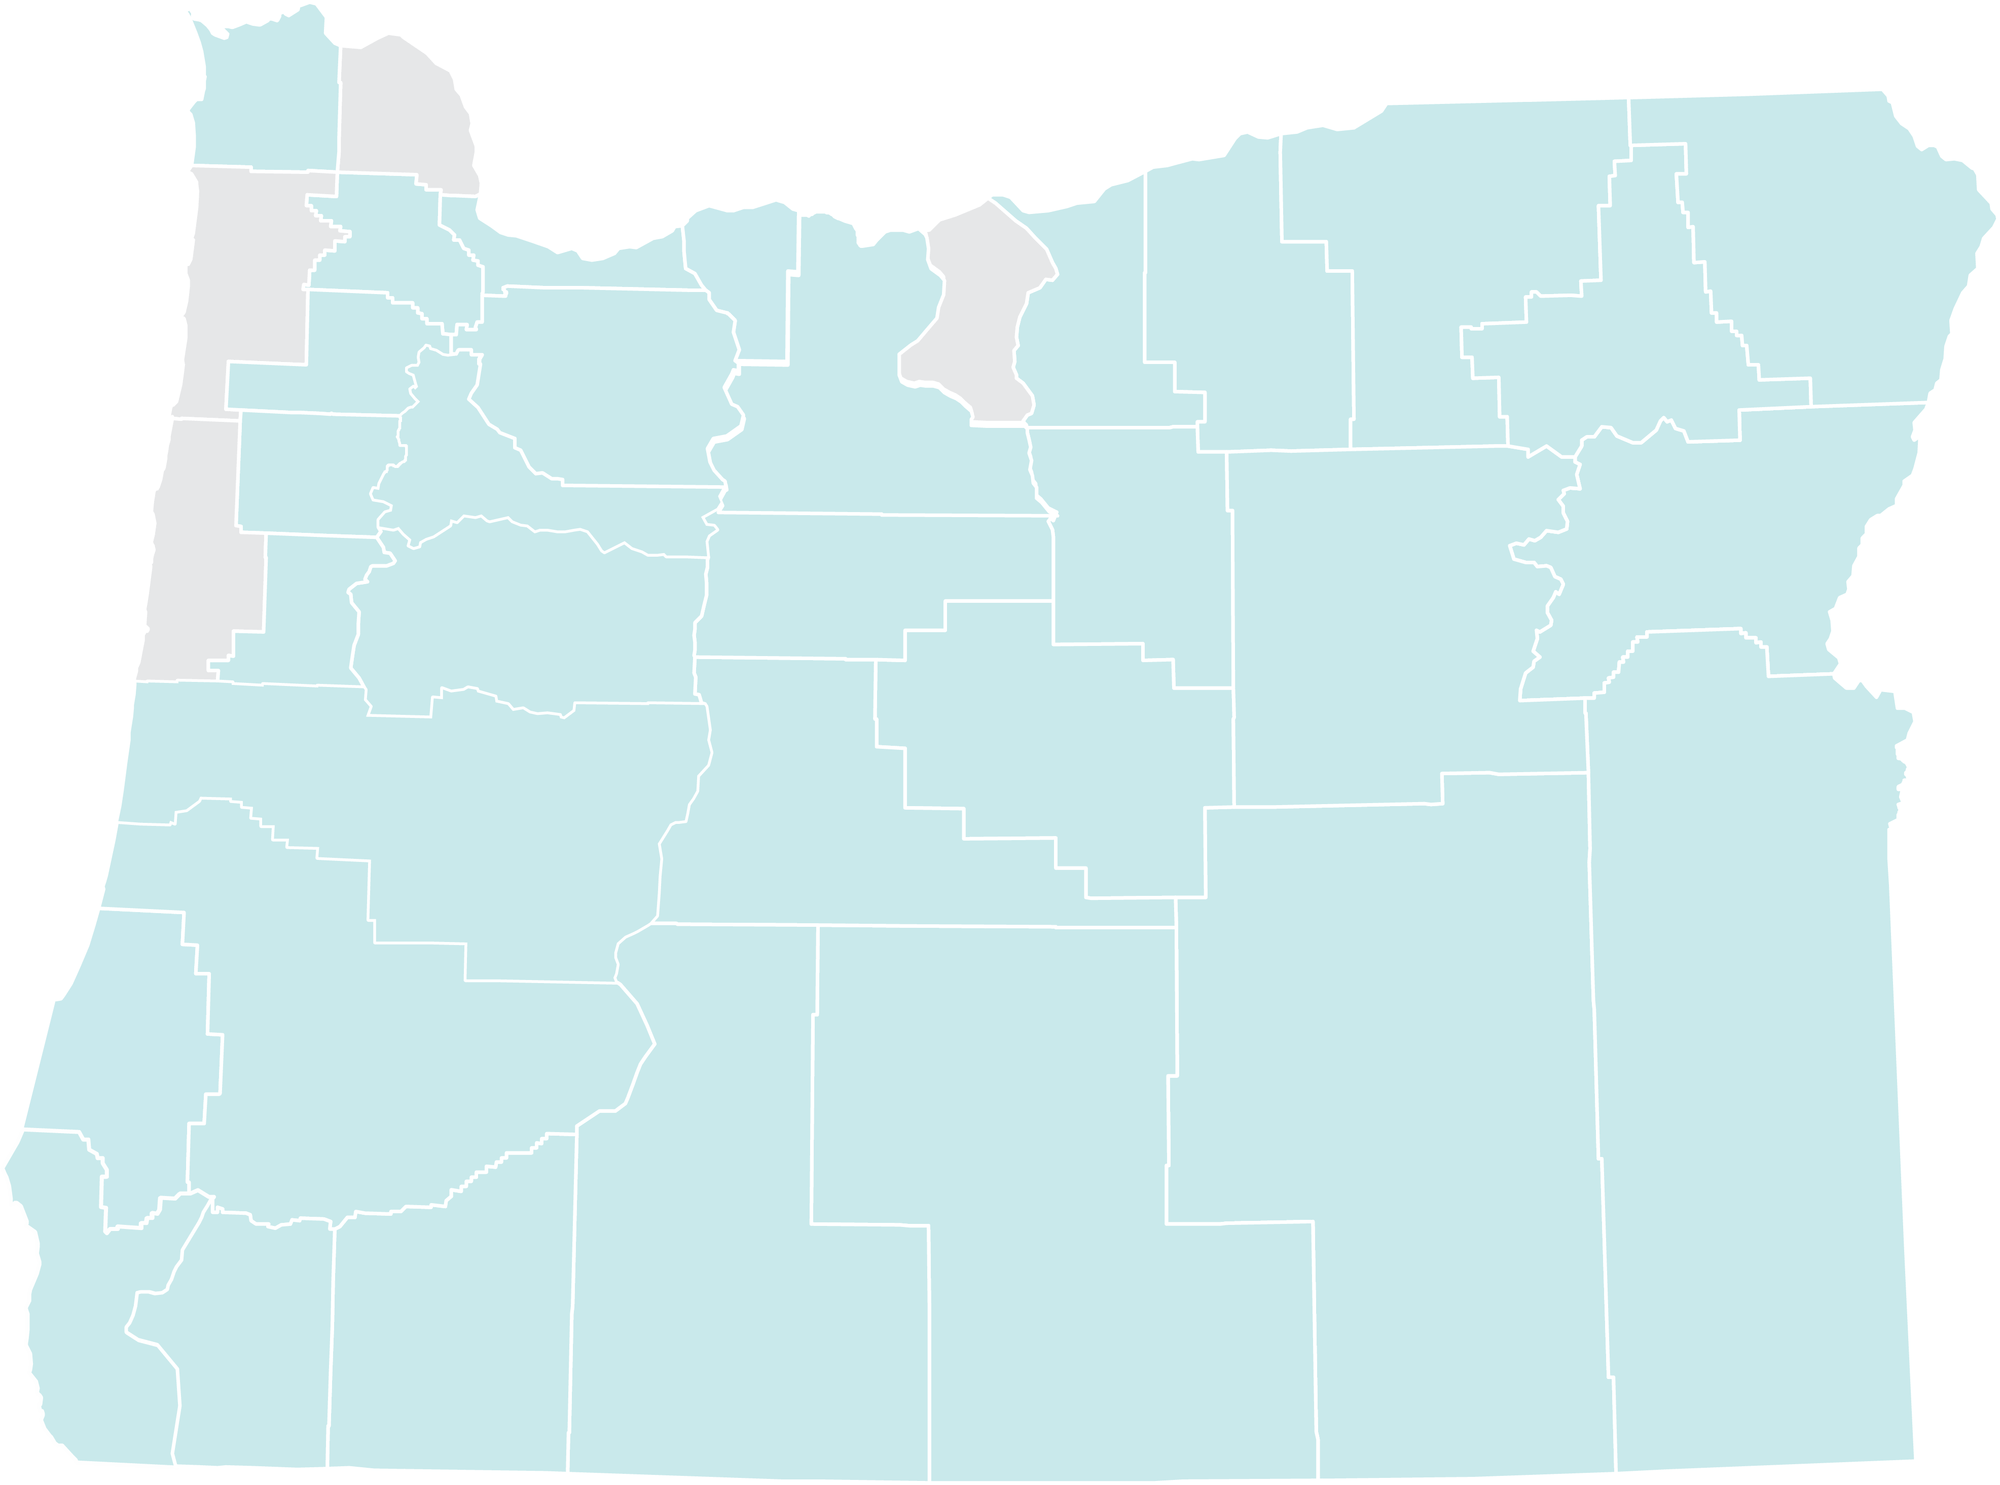 map showing chokecherry occurs in most Oregon counties